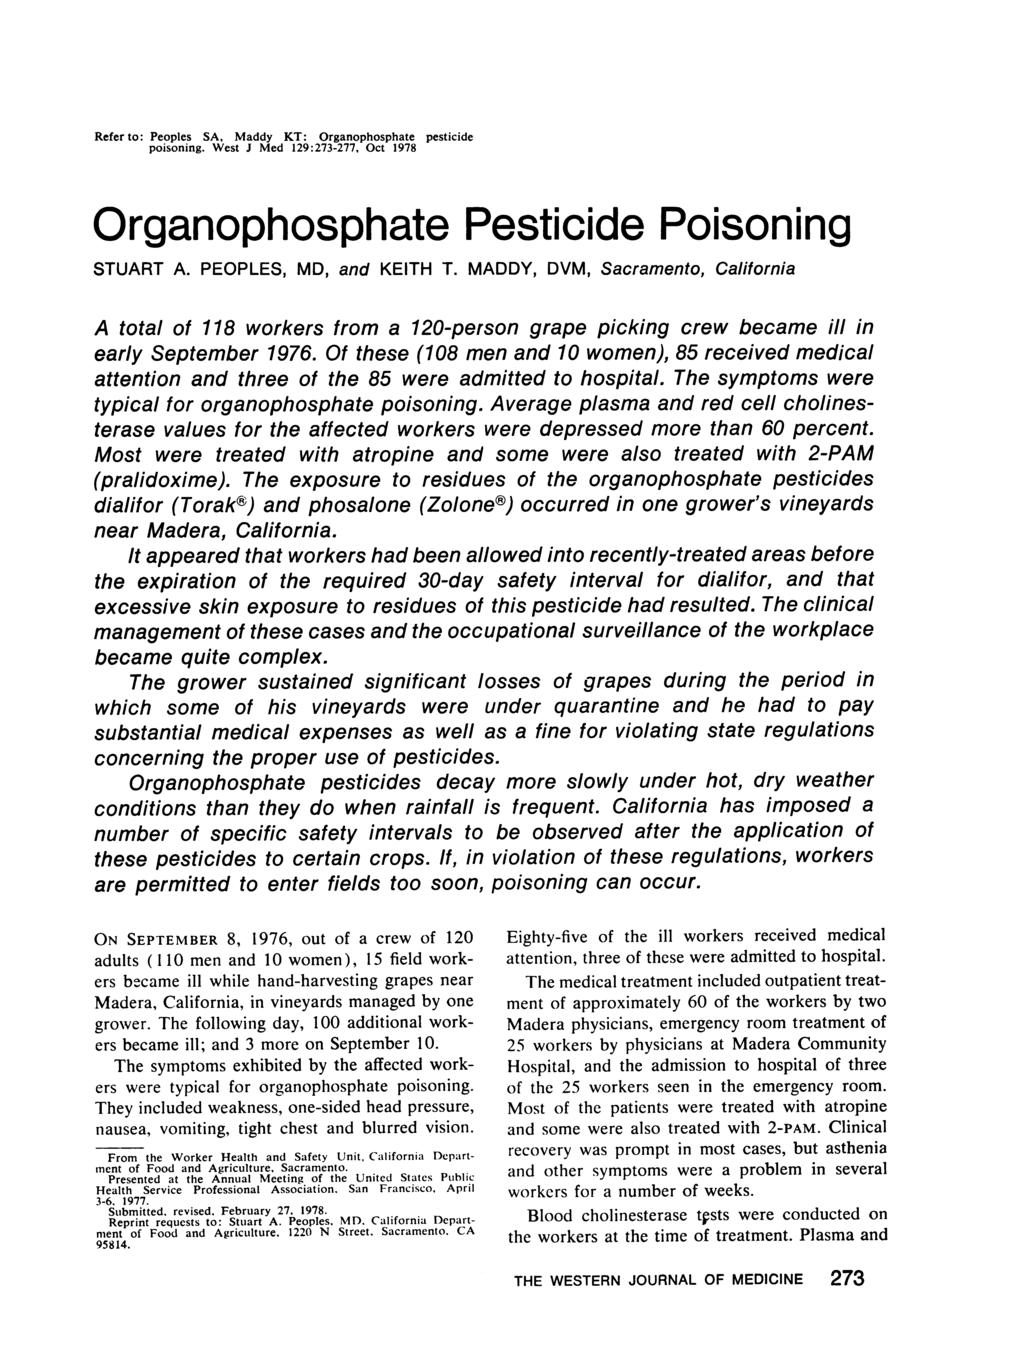 Refer to: Peoples SA, Maddy KT: Organophosphate pesticide poisoning. West J Med 129:273-277, Oct 1978 Organophosphate Pesticide Poisoning STUART A. PEOPLES, MD, and KEITH T.